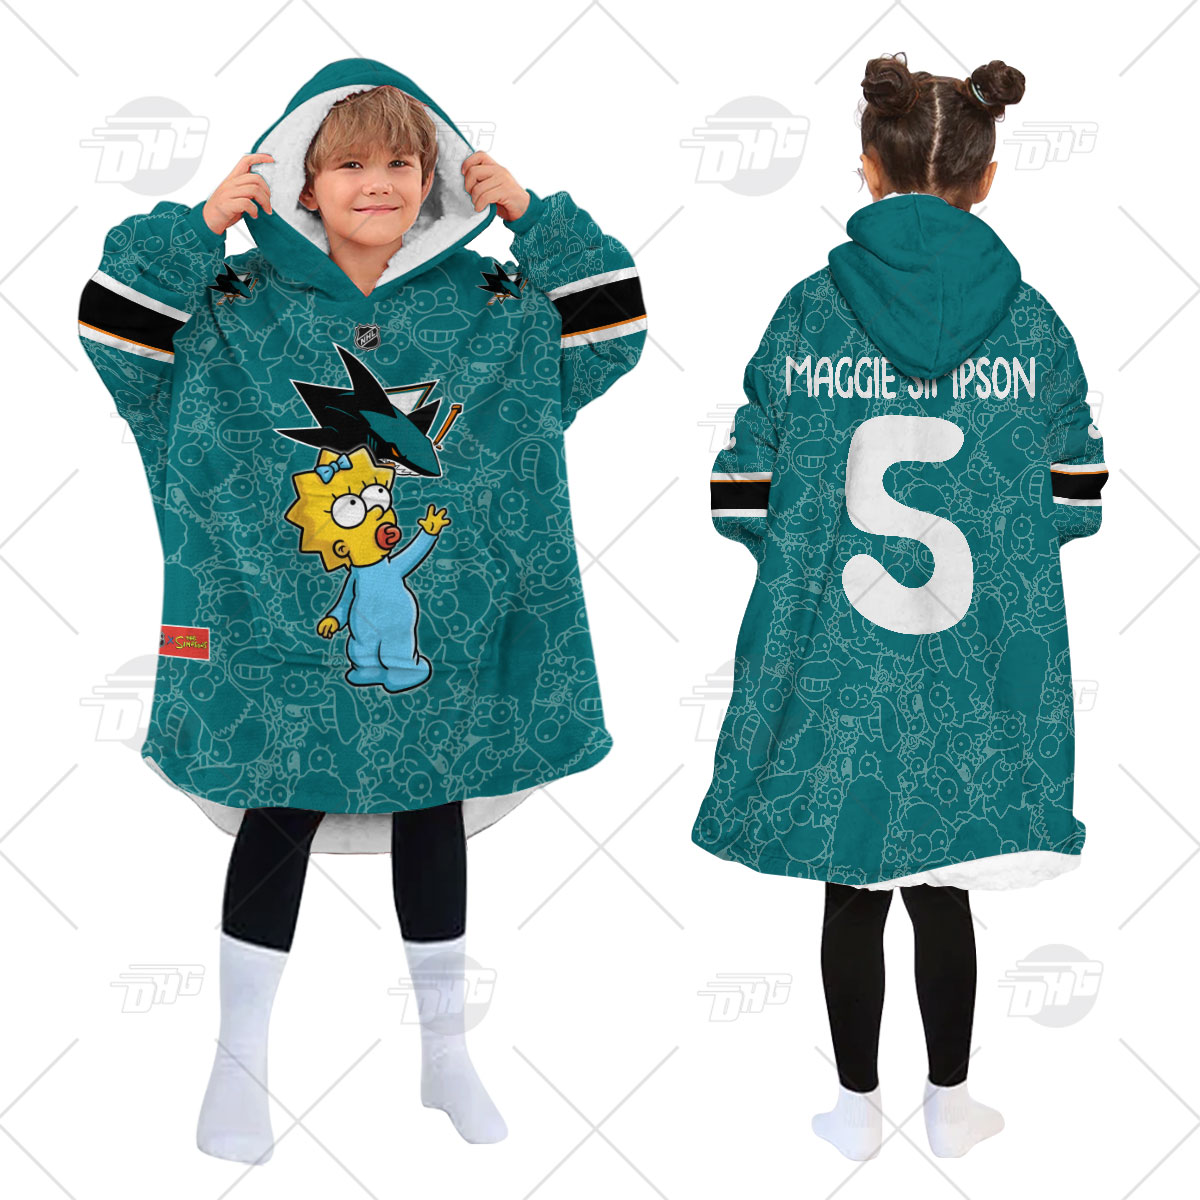 SJ Sharks Hockey Sweater Custom Best-selling Gift - Personalized Gifts:  Family, Sports, Occasions, Trending